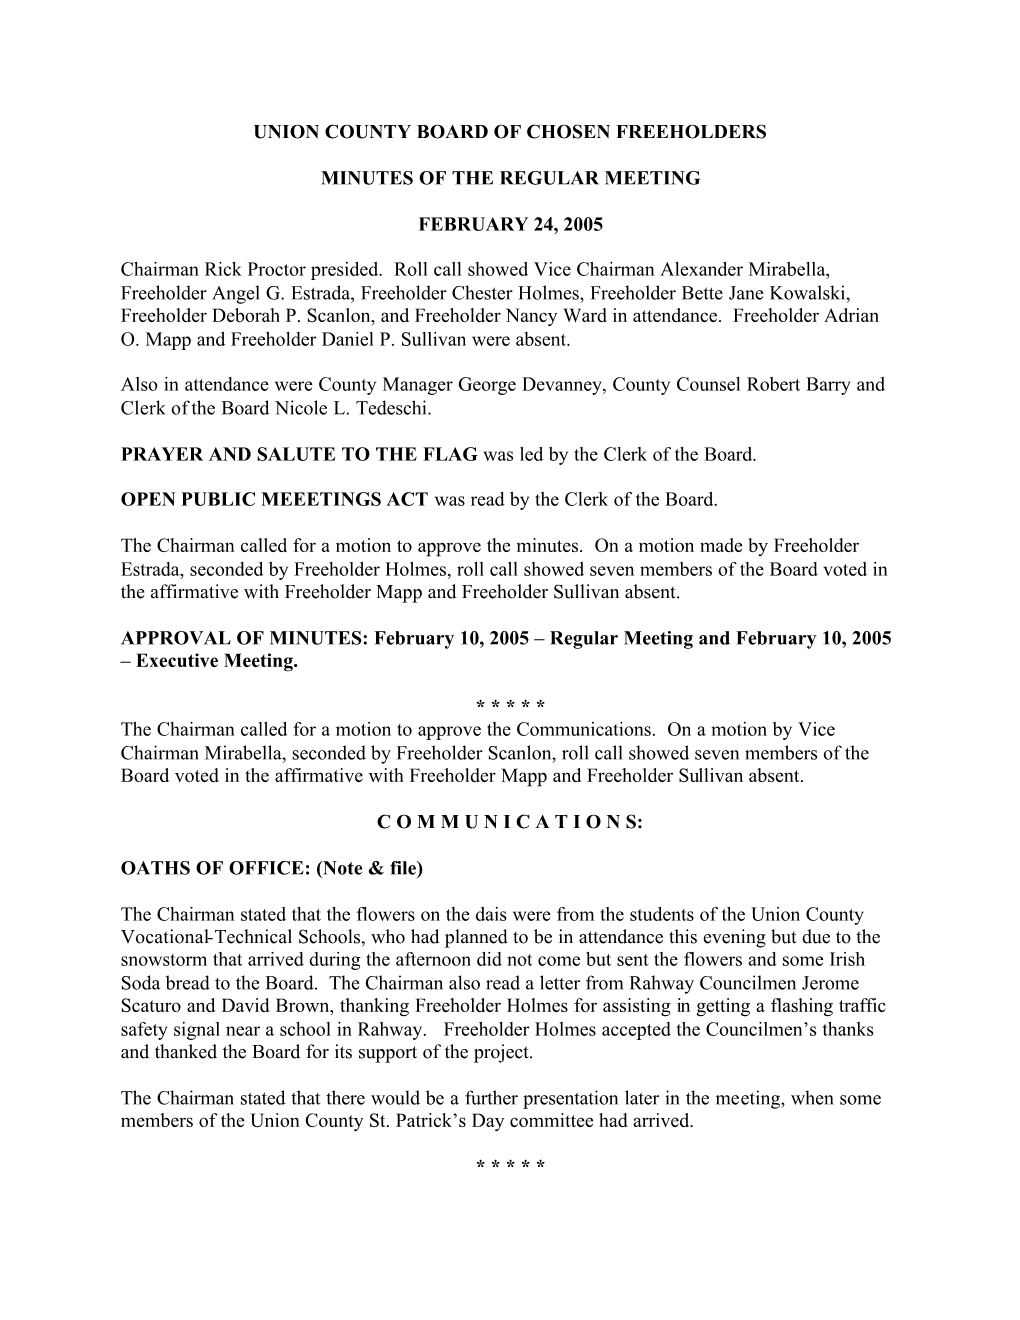 Union County Board of Chosen Freeholders Minutes